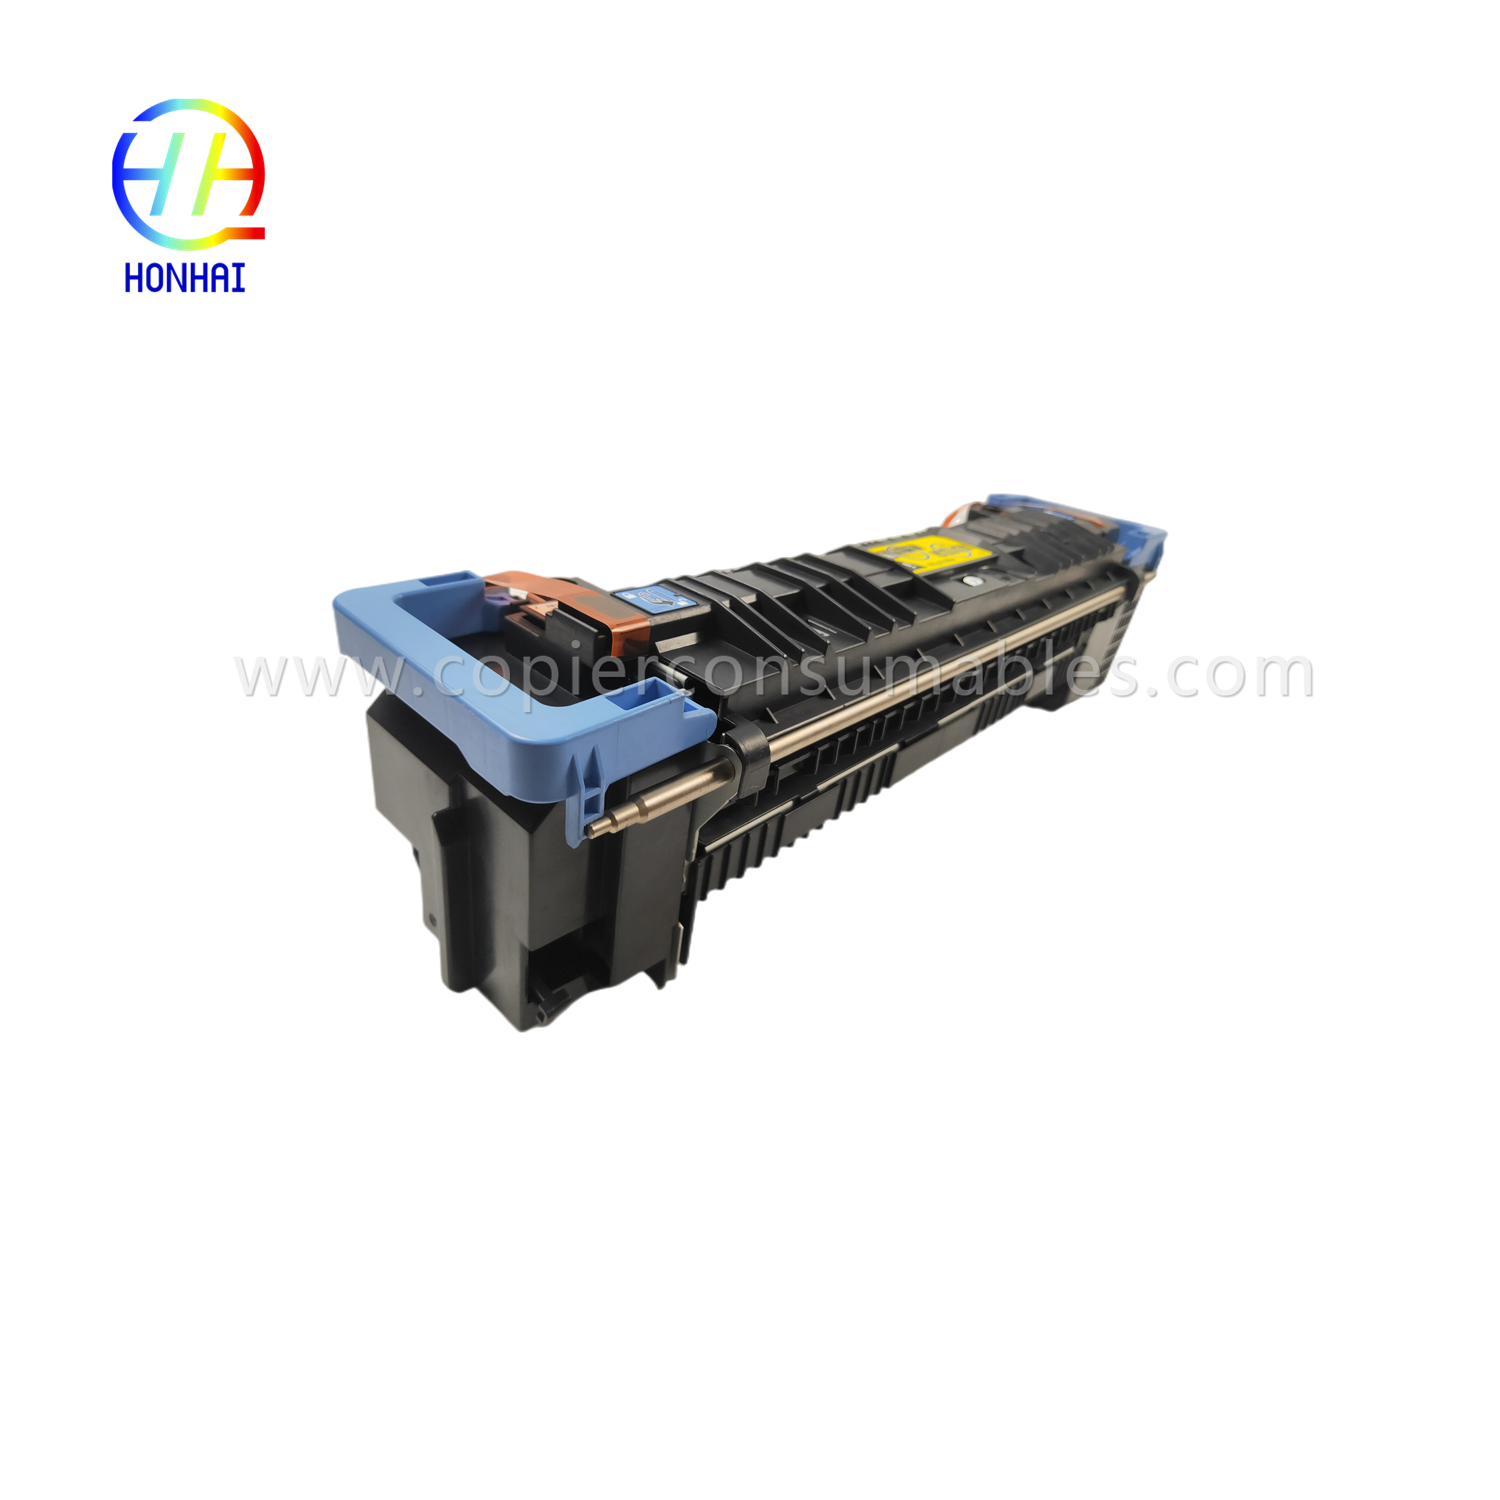 https://www.copierconsumables.com/fuser-assembly-unit-for-hp-m855-m880-m855dn-m855xh-m880z-m880z-c1n54-67901-c1n58-67901-fusing-heating-fixing-assy-